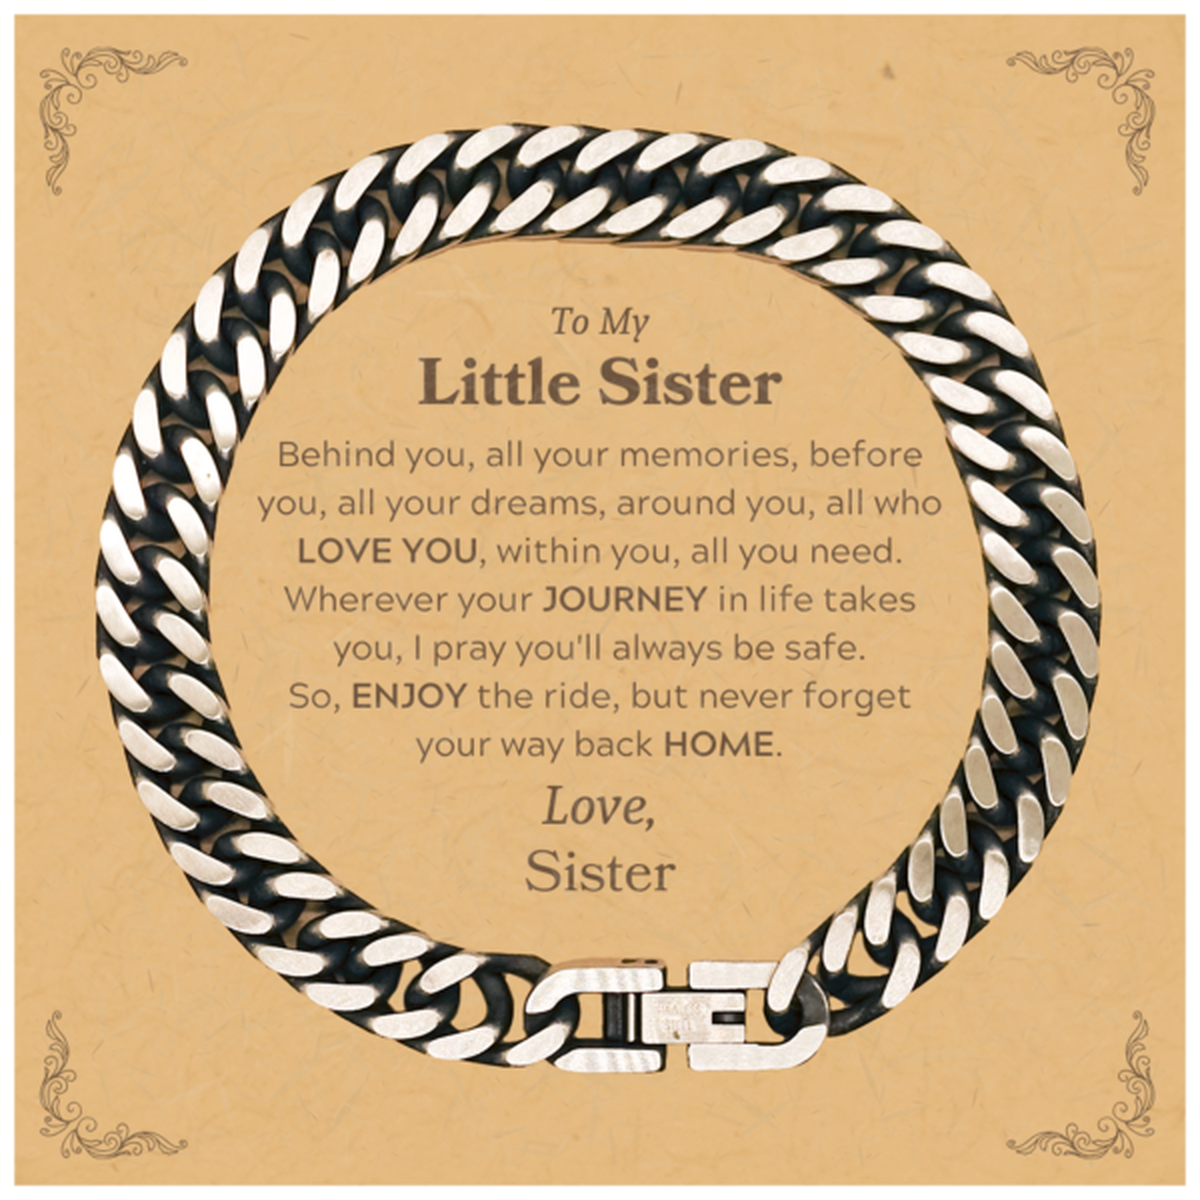 To My Little Sister Graduation Gifts from Sister, Little Sister Cuban Link Chain Bracelet Christmas Birthday Gifts for Little Sister Behind you, all your memories, before you, all your dreams. Love, Sister